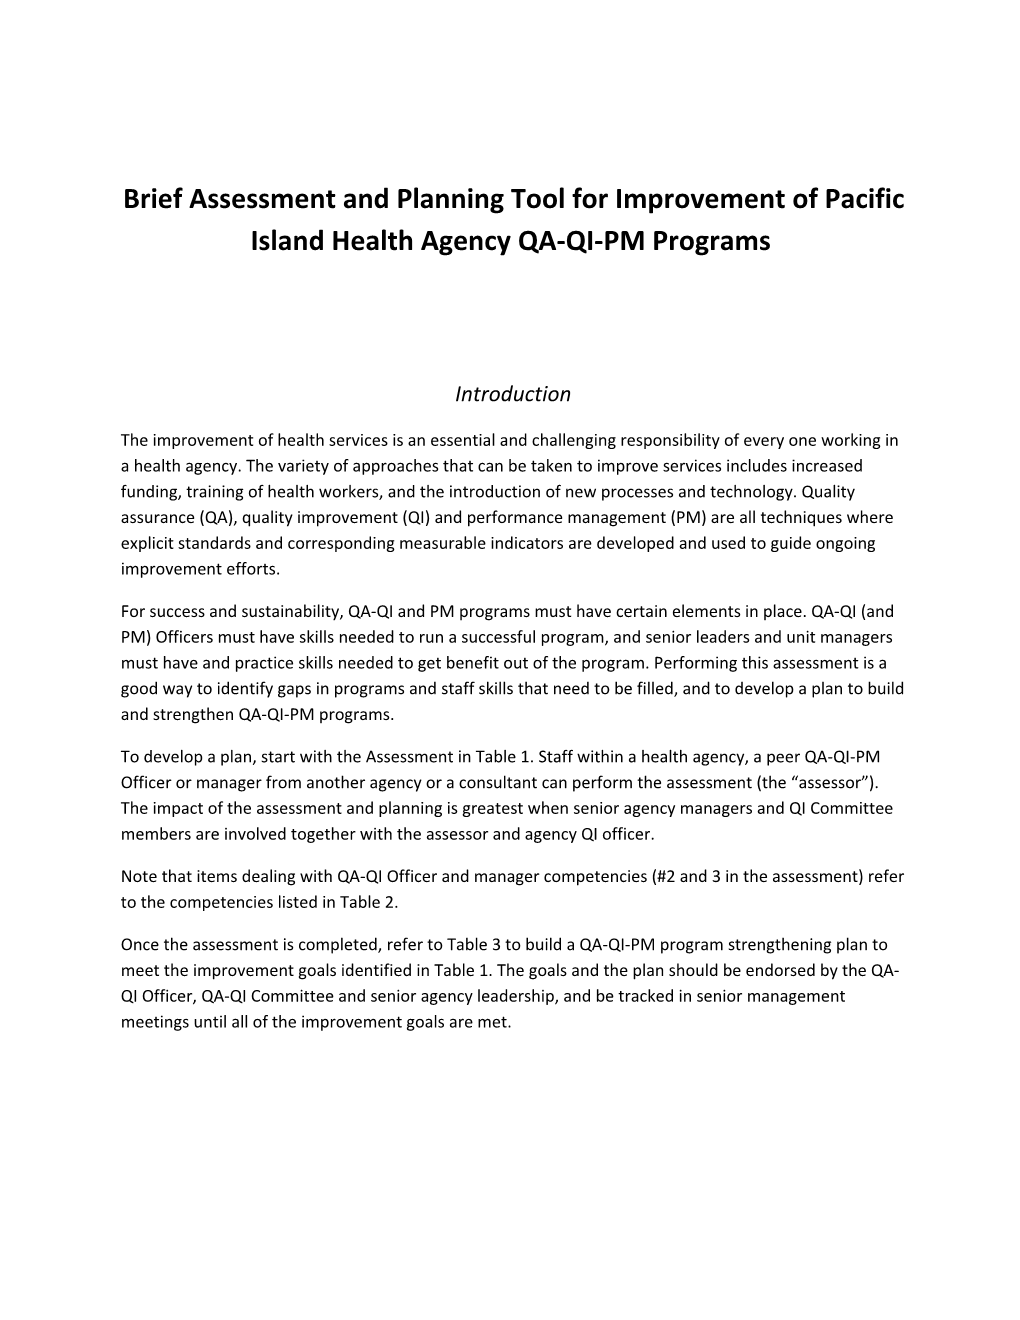 Brief Assessment and Planning Tool for Improvement of Pacific Island Health Agency QA-QI-PM